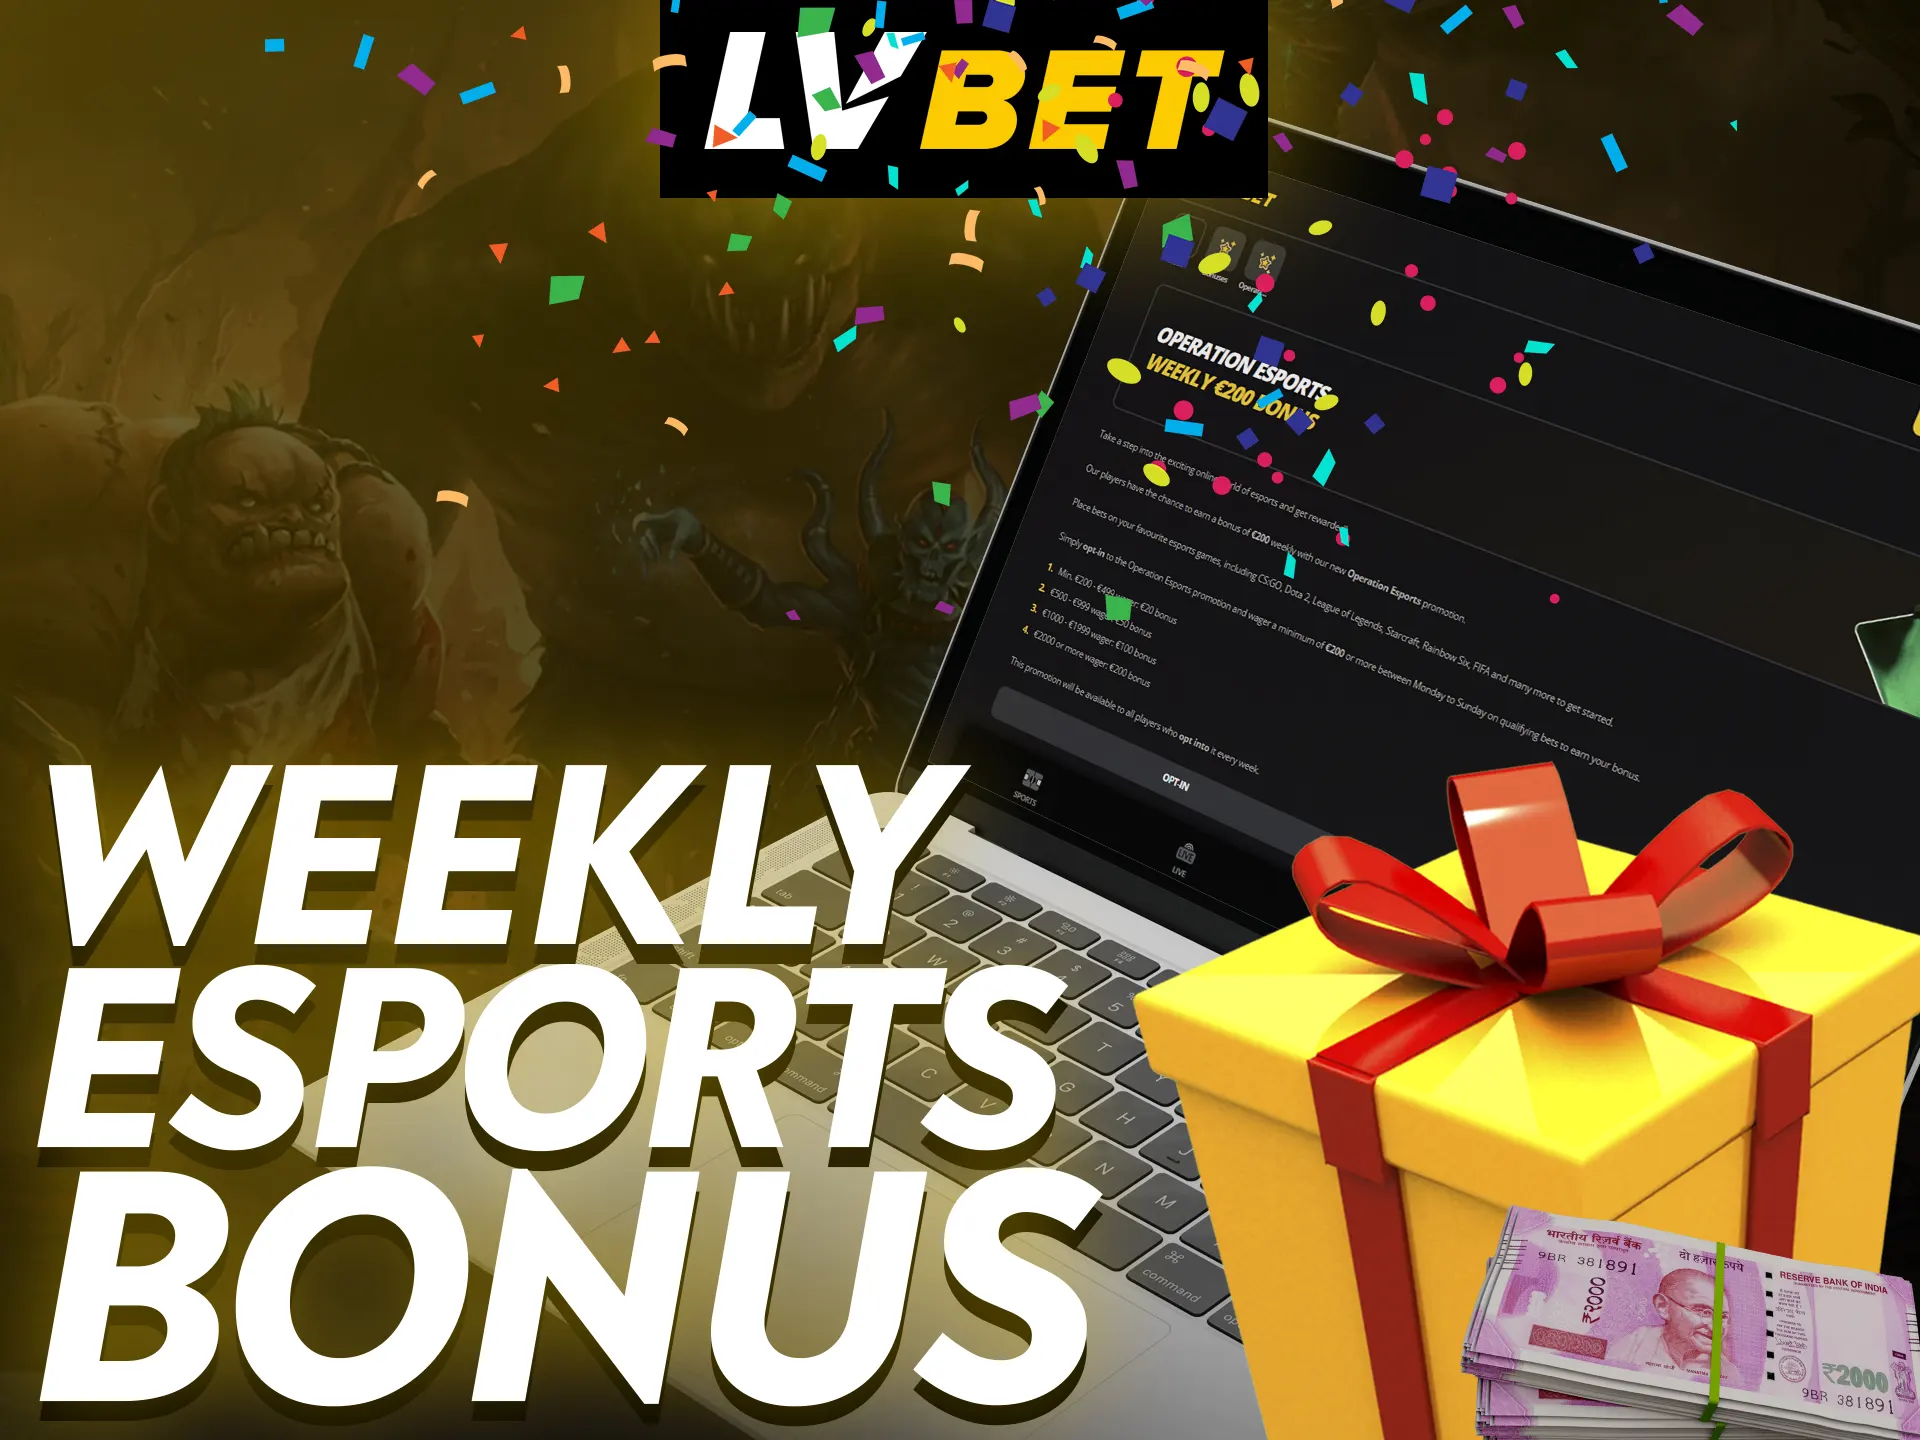 LV Bet has a weekly bonus for esports betting.